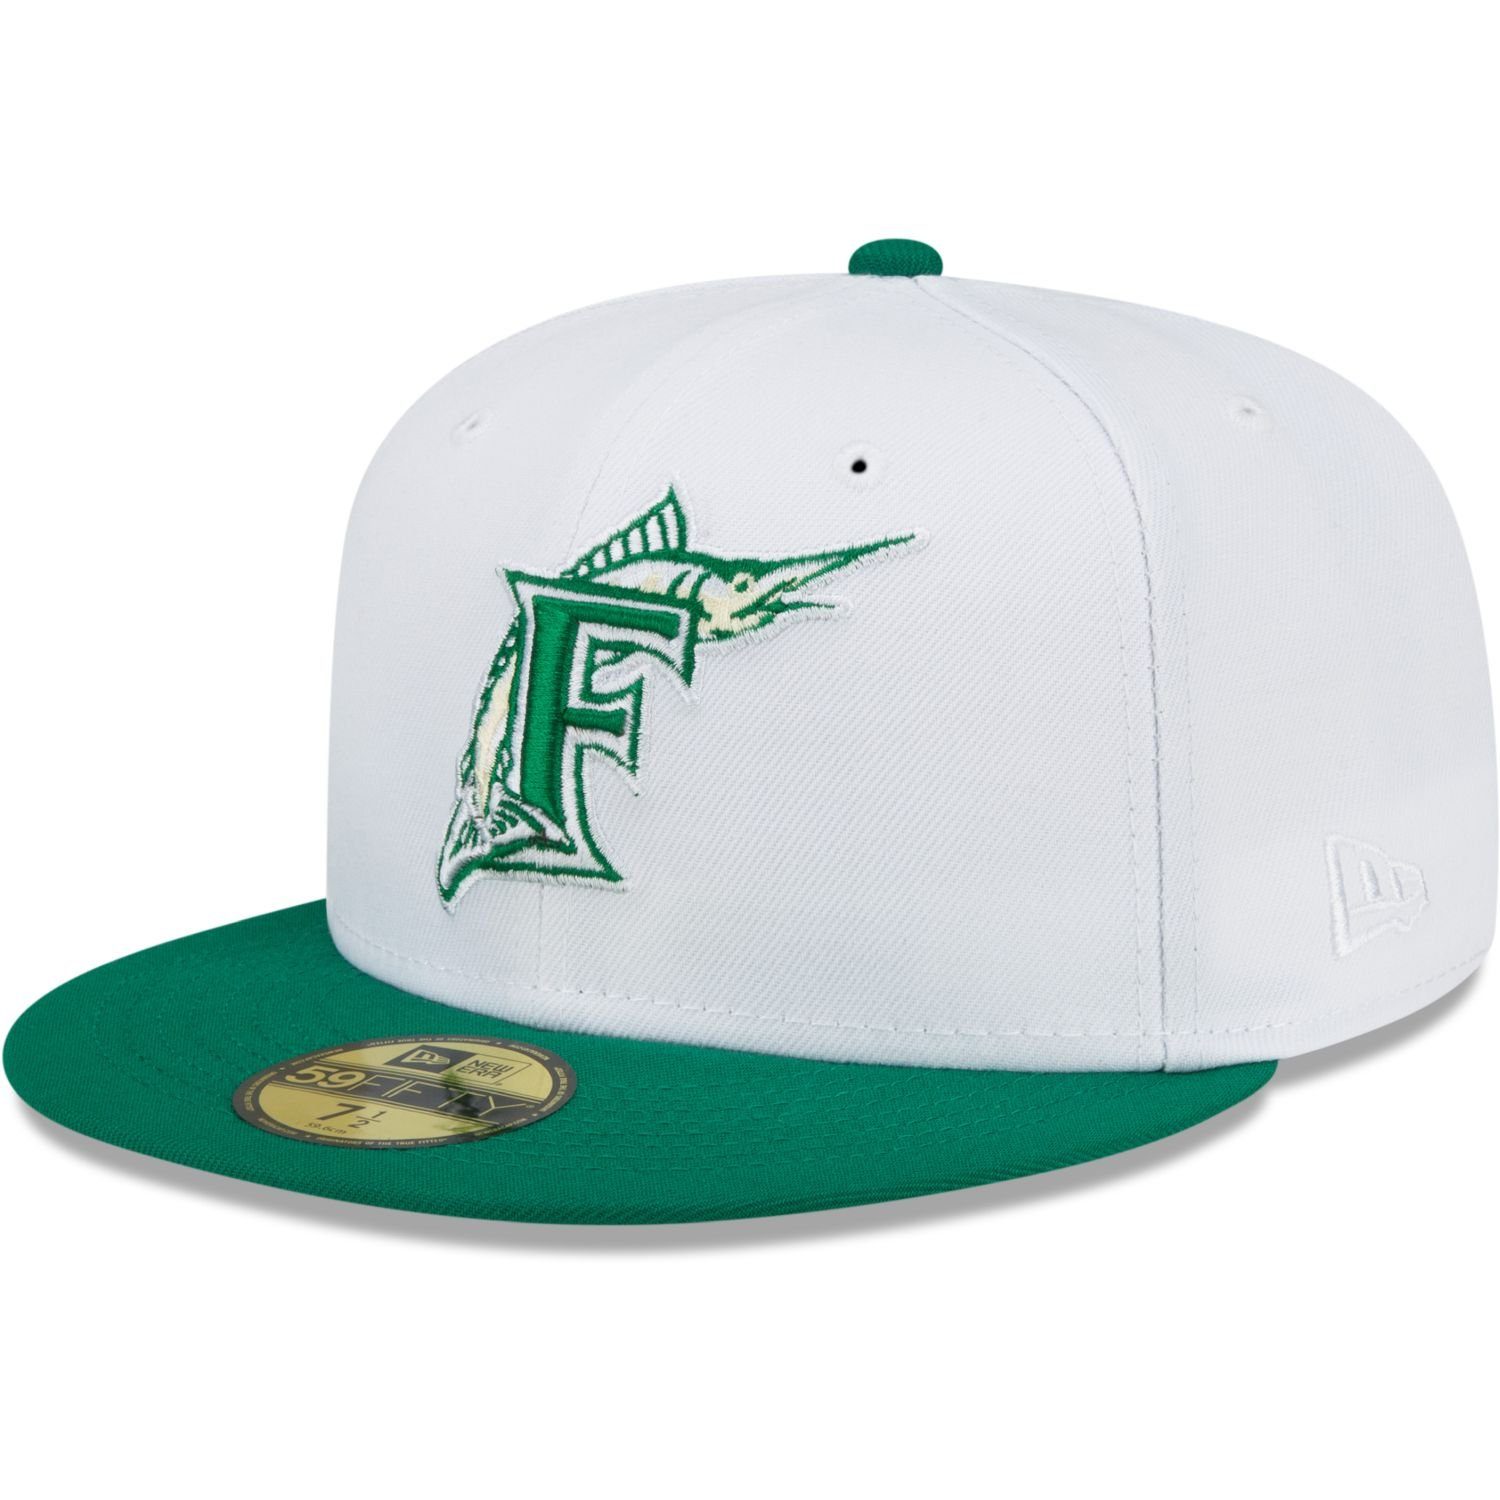 New Marlins Fitted Cap 59Fifty ANNIVERSARY Florida Era